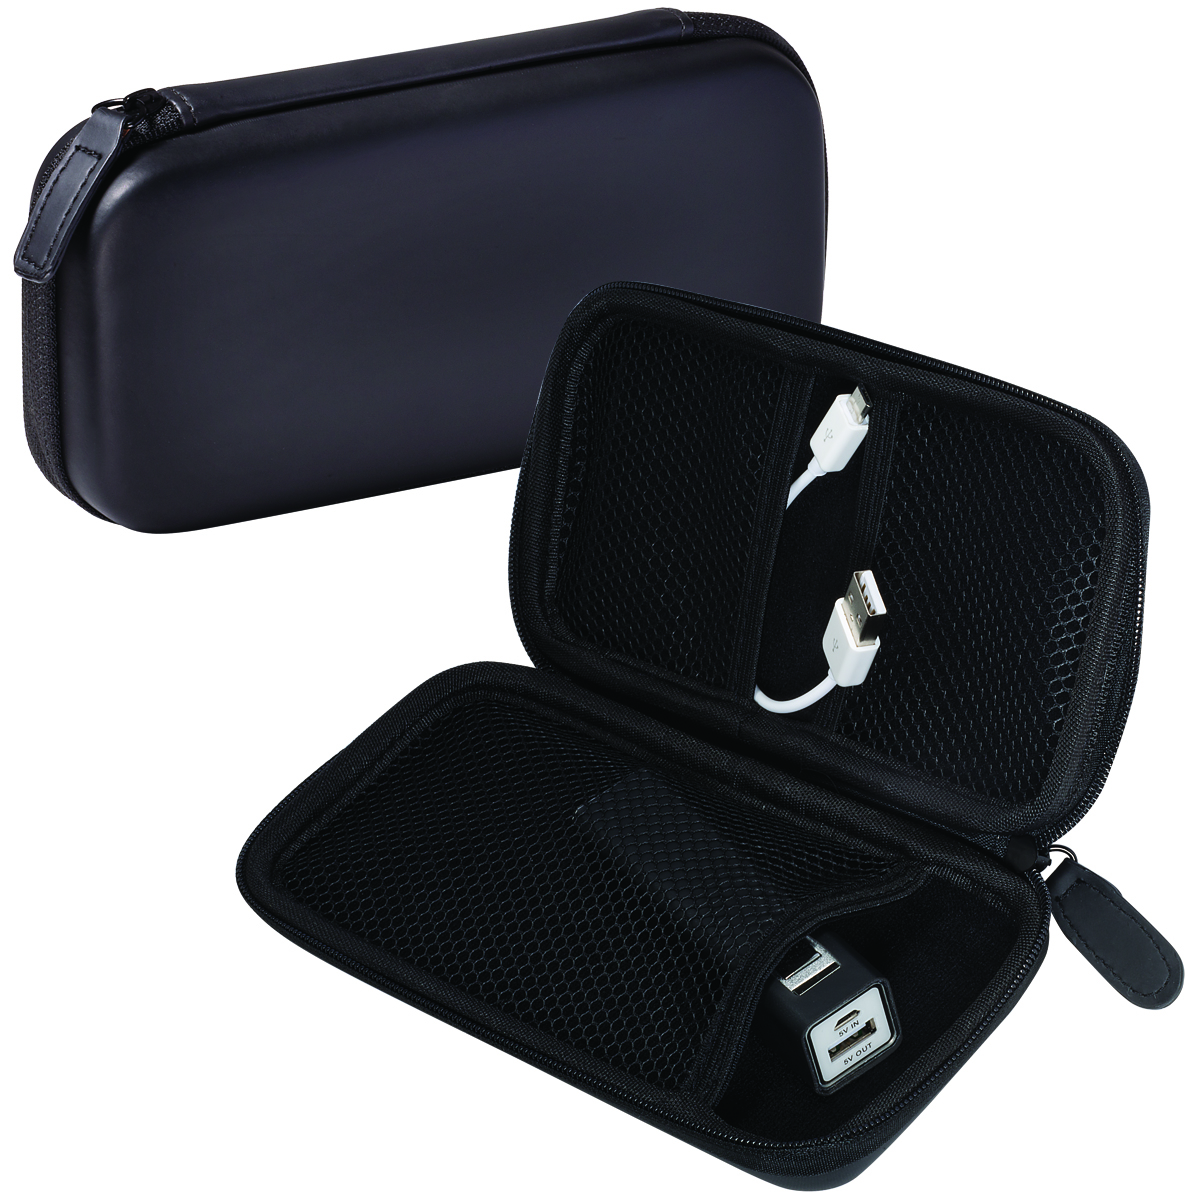 Tuscany ™ Tech Case and Power Bank Gift Set